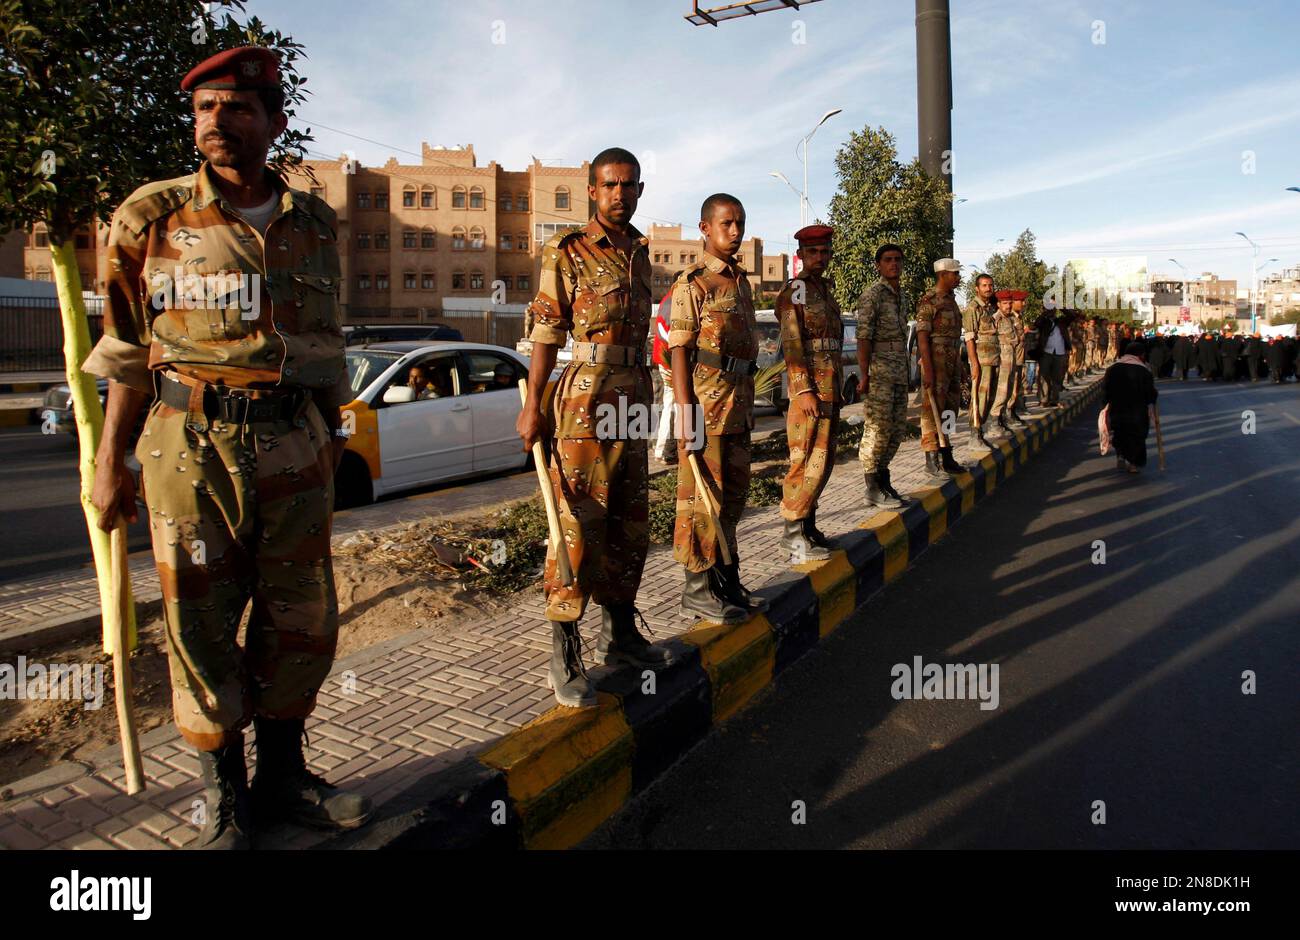 Yemeni soldiers stand guard near the residence of Yemen's president Abed Rabbu Mansour Hadi during a rally to show their support in Sanaa, Yemen, Thursday, Dec. 20, 2012. (AP Photo/Hani Mohammed) Stock Photo